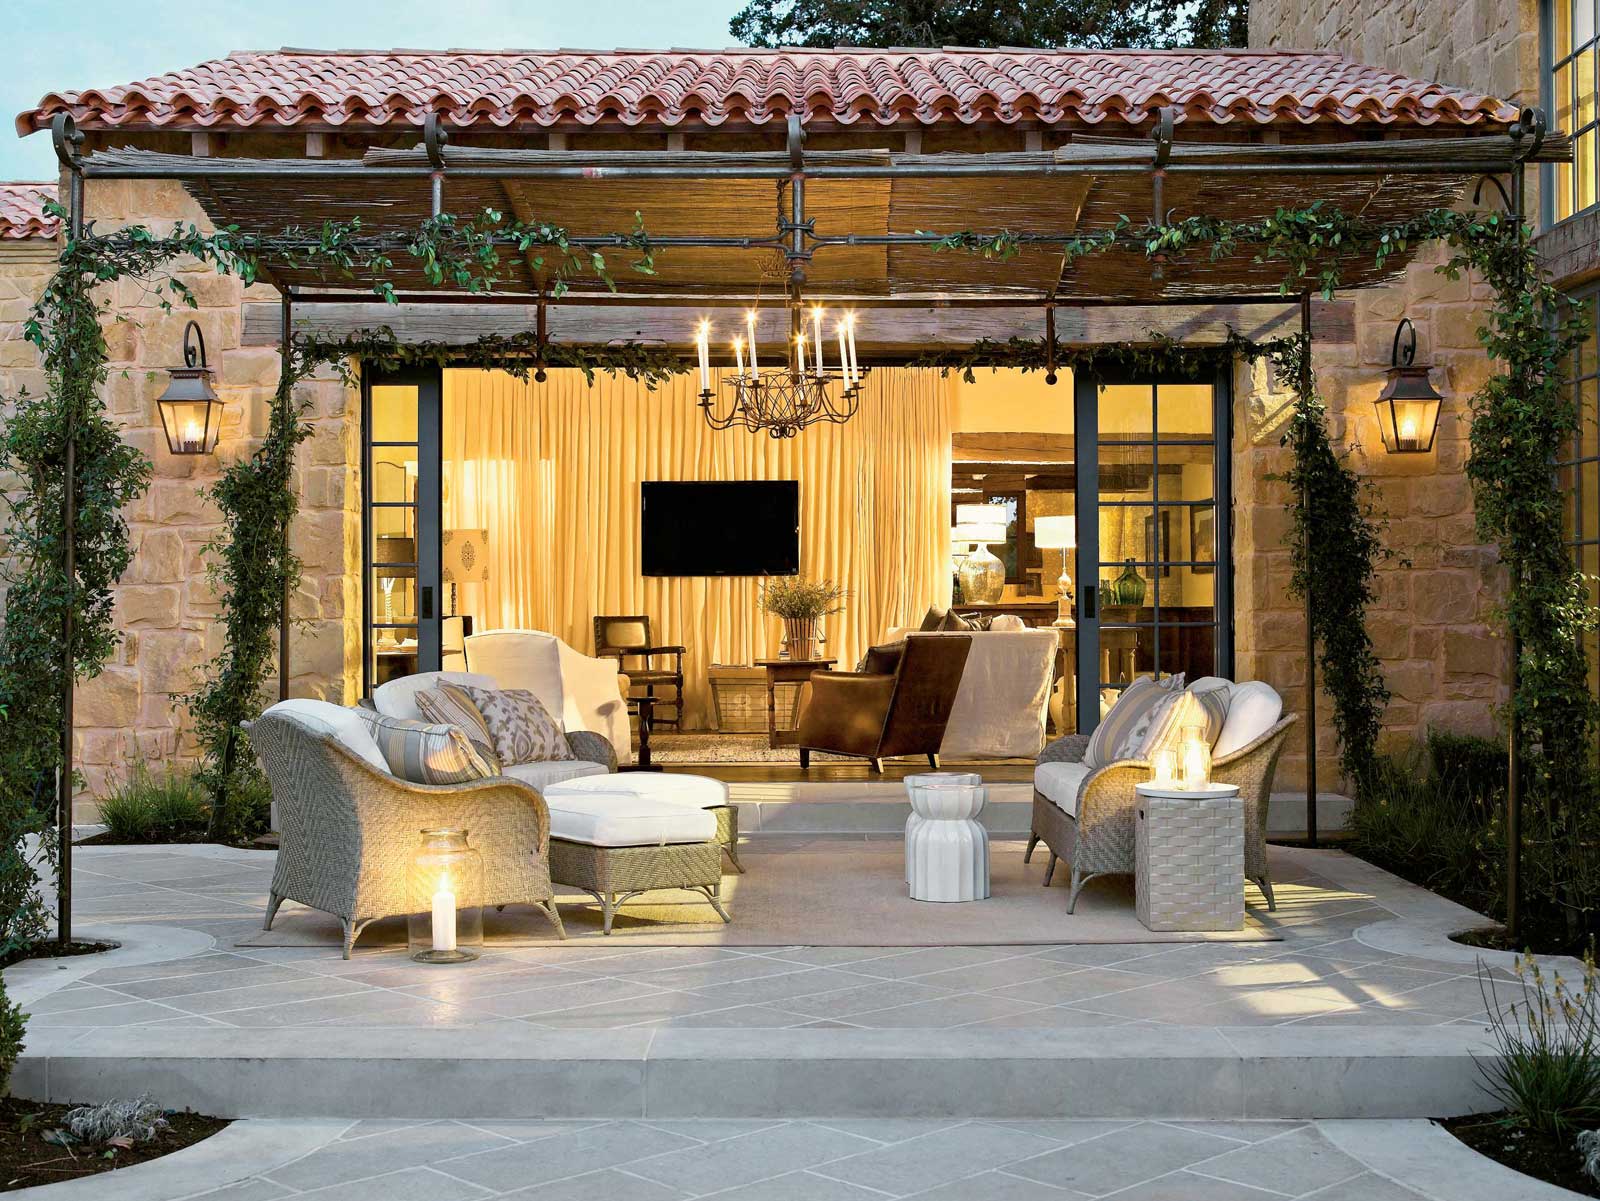 Outdoor Living Traditional Minimalist Outdoor Living Spaces Using Traditional Outdoor Sofa And Classic Pergola Design For Home Inspiration Exterior Futuristic Home With Wooden Furniture And Outdoor Living Space